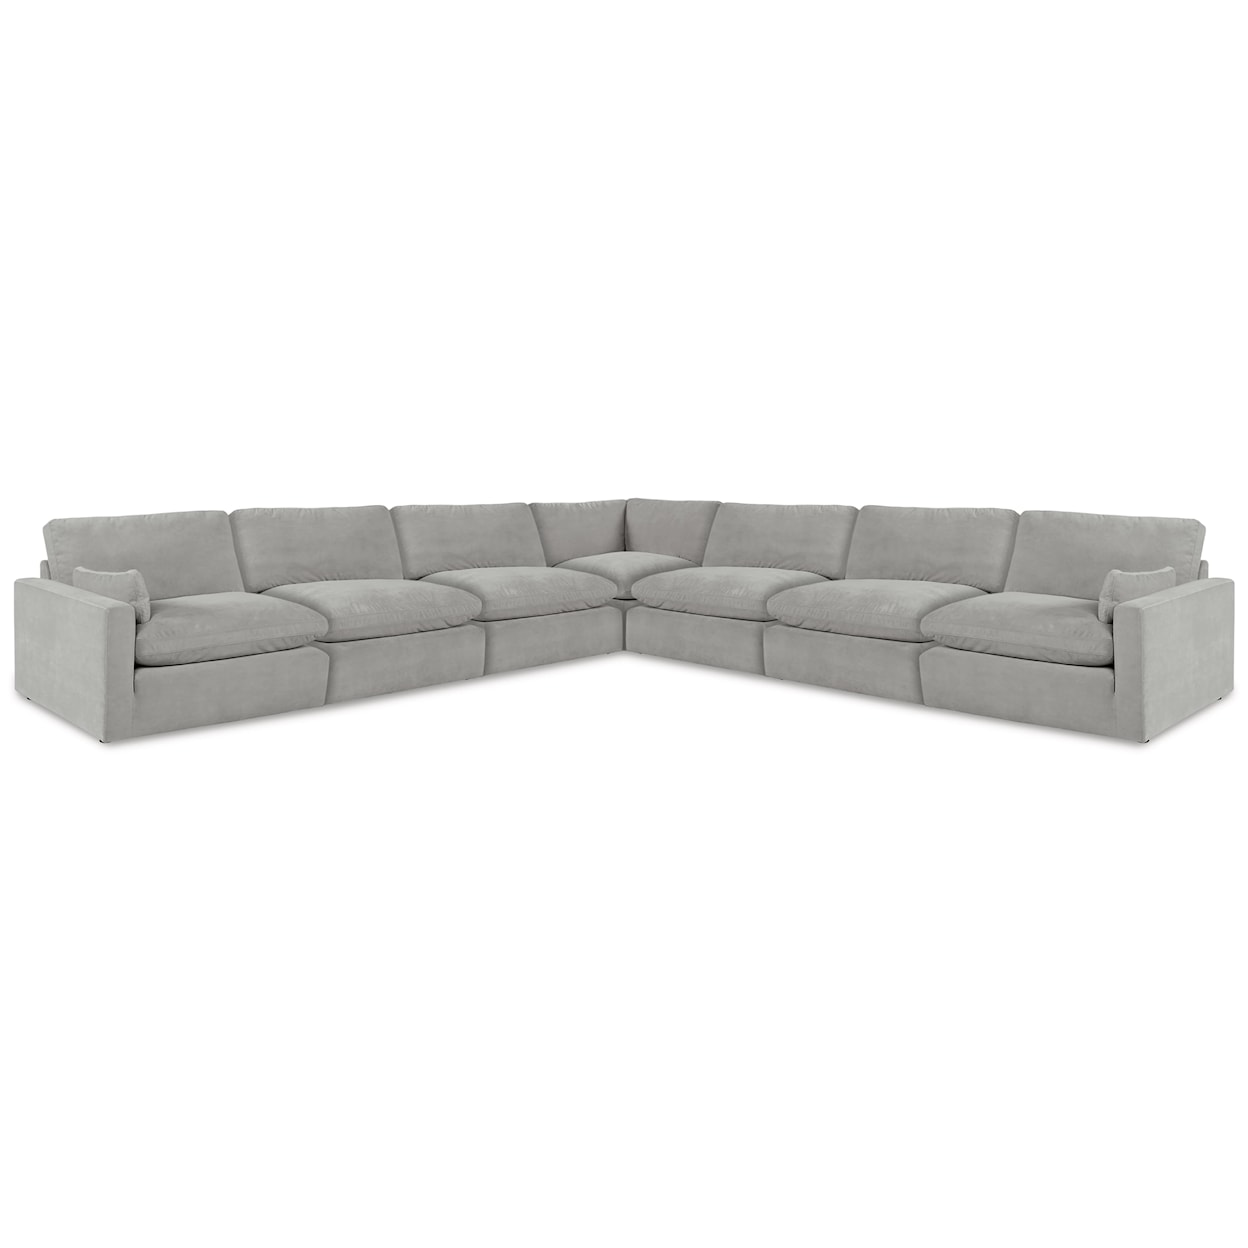 StyleLine Sophie 7-Piece Sectional